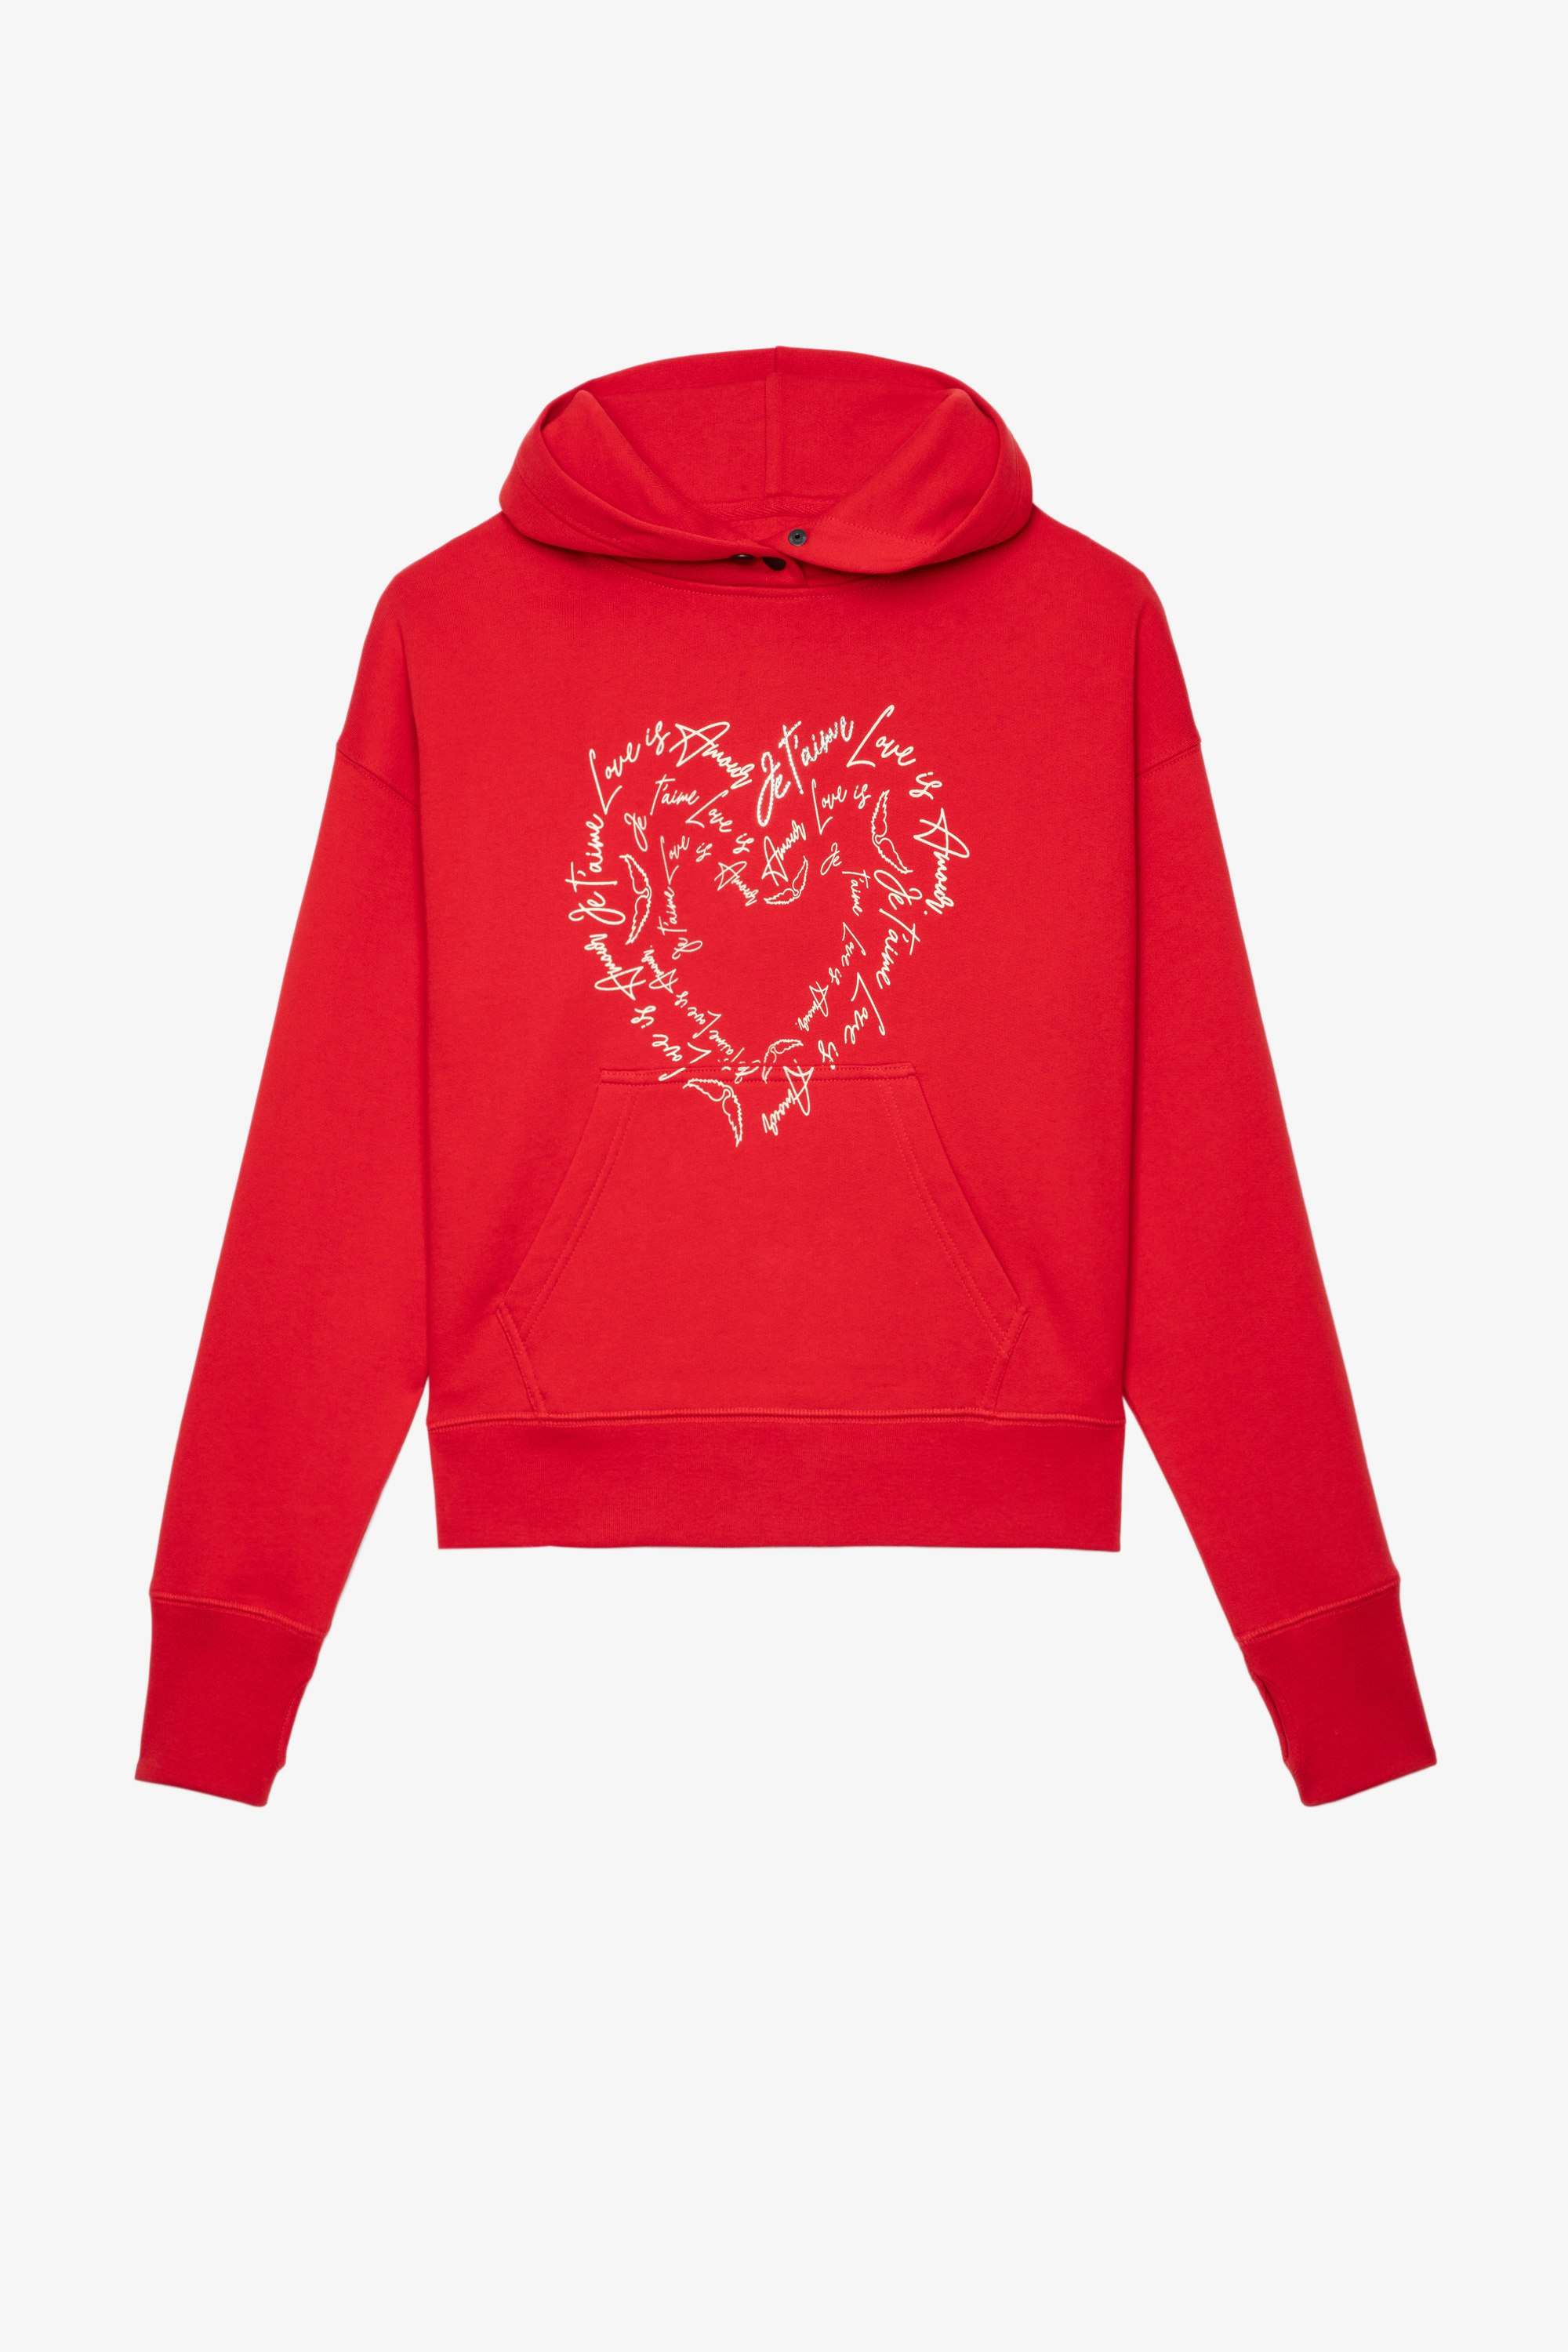 Mia スウェット Women’s red cotton hooded sweatshirt with heart-shaped messages of love